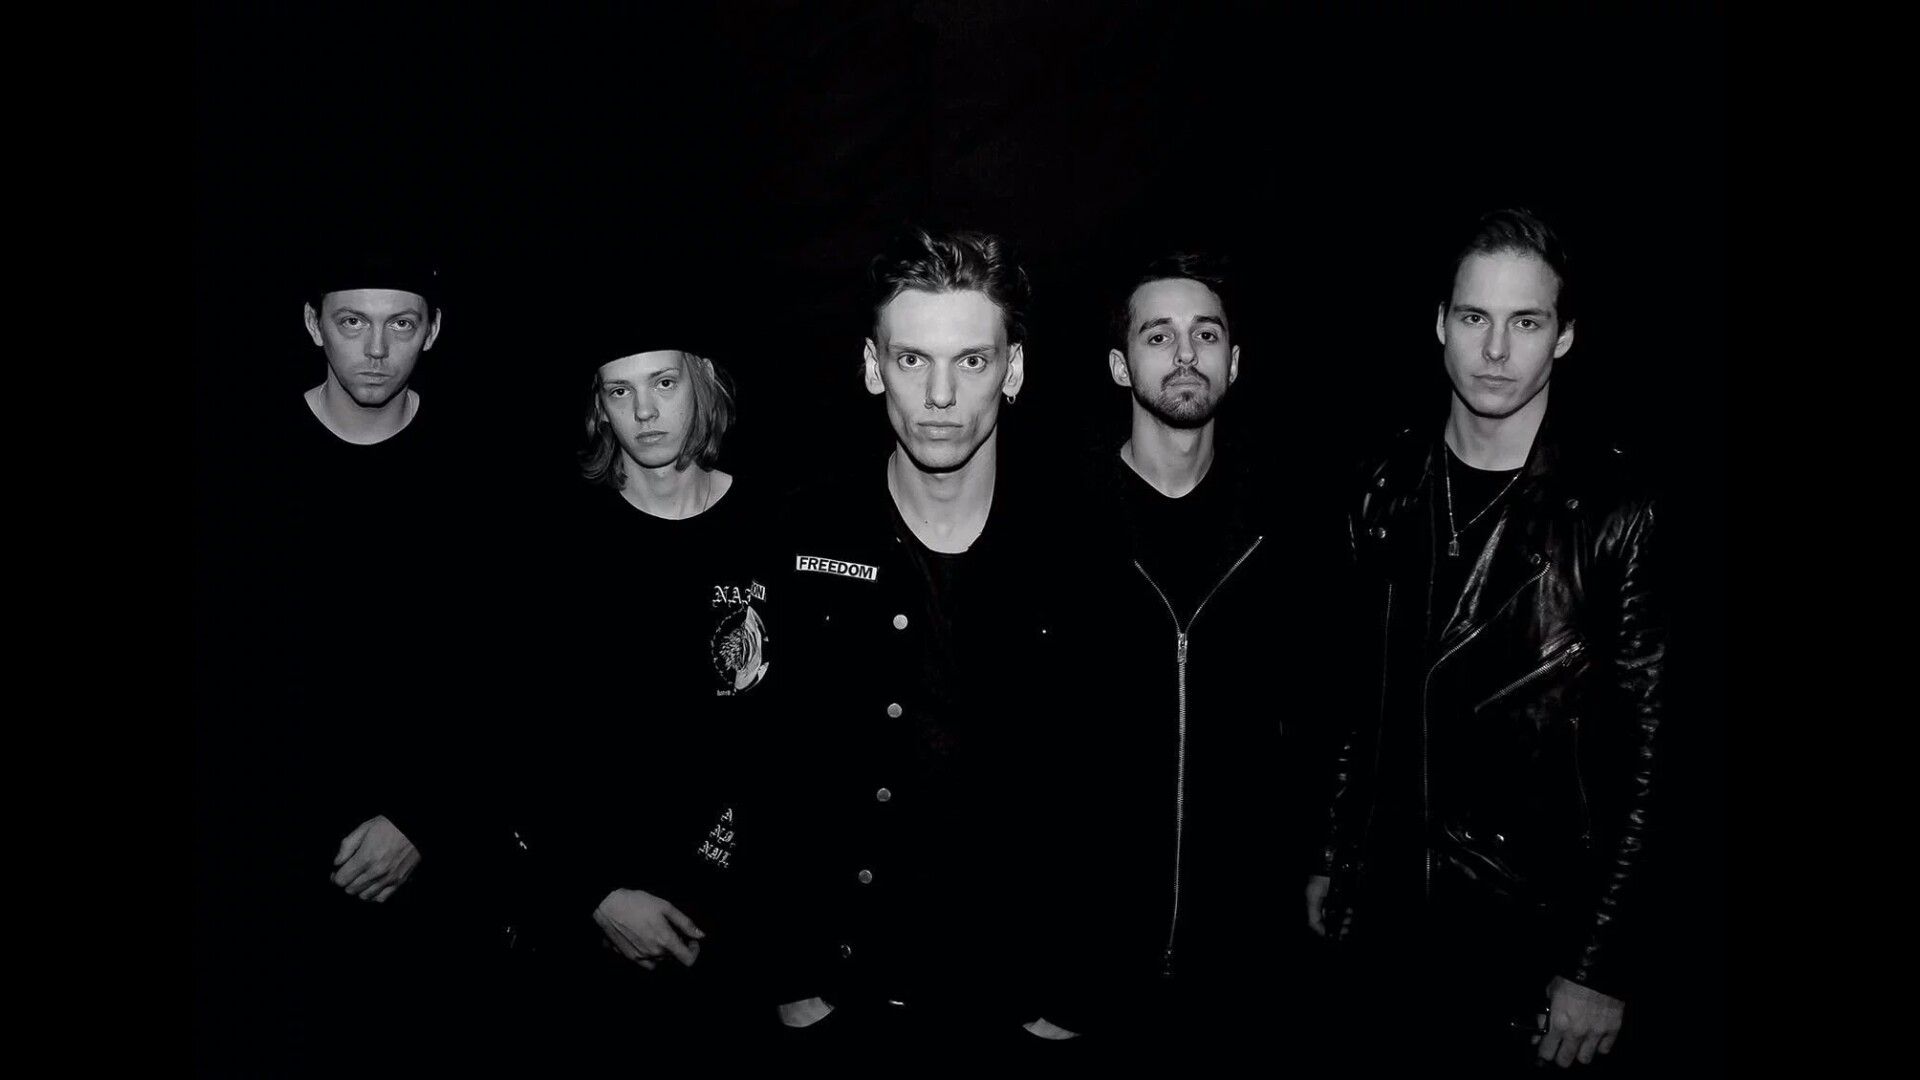 Counterfeit Band. Jamie campbell bower, Jamie campbell, Jamie